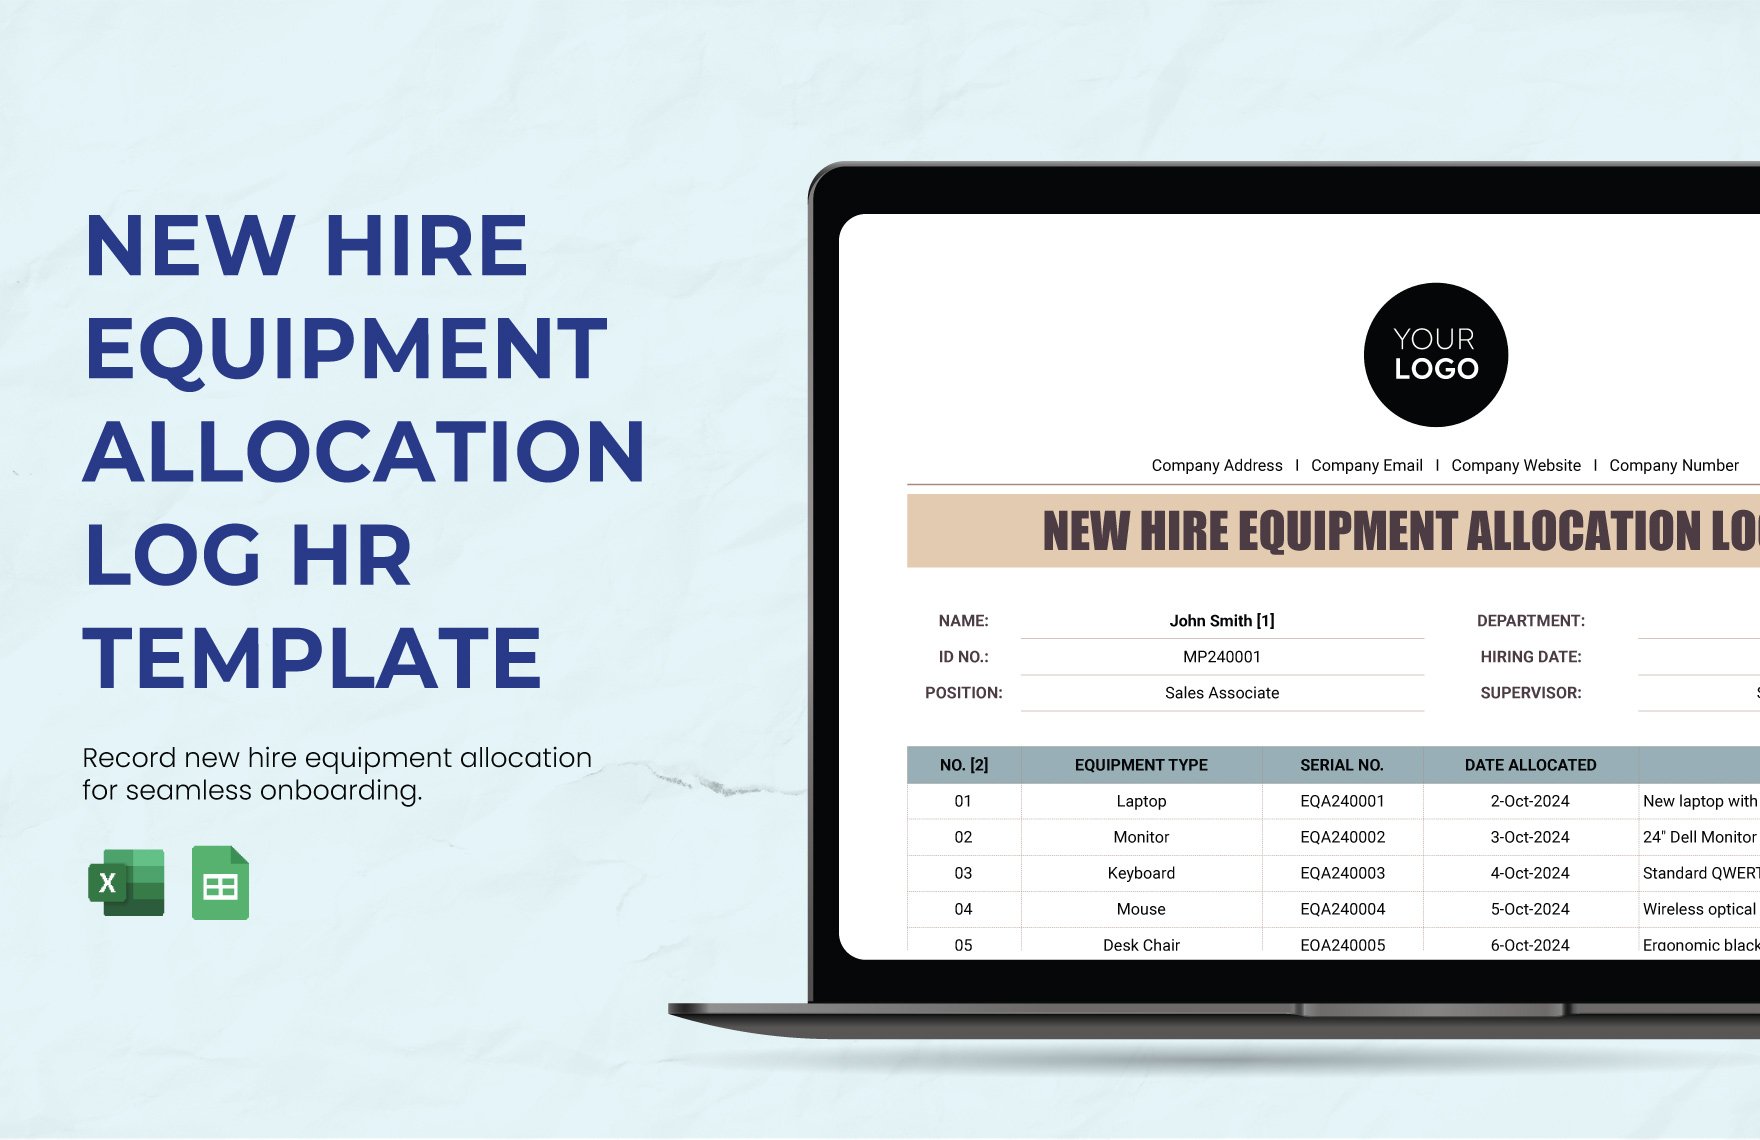 New Hire Equipment Allocation Log HR Template